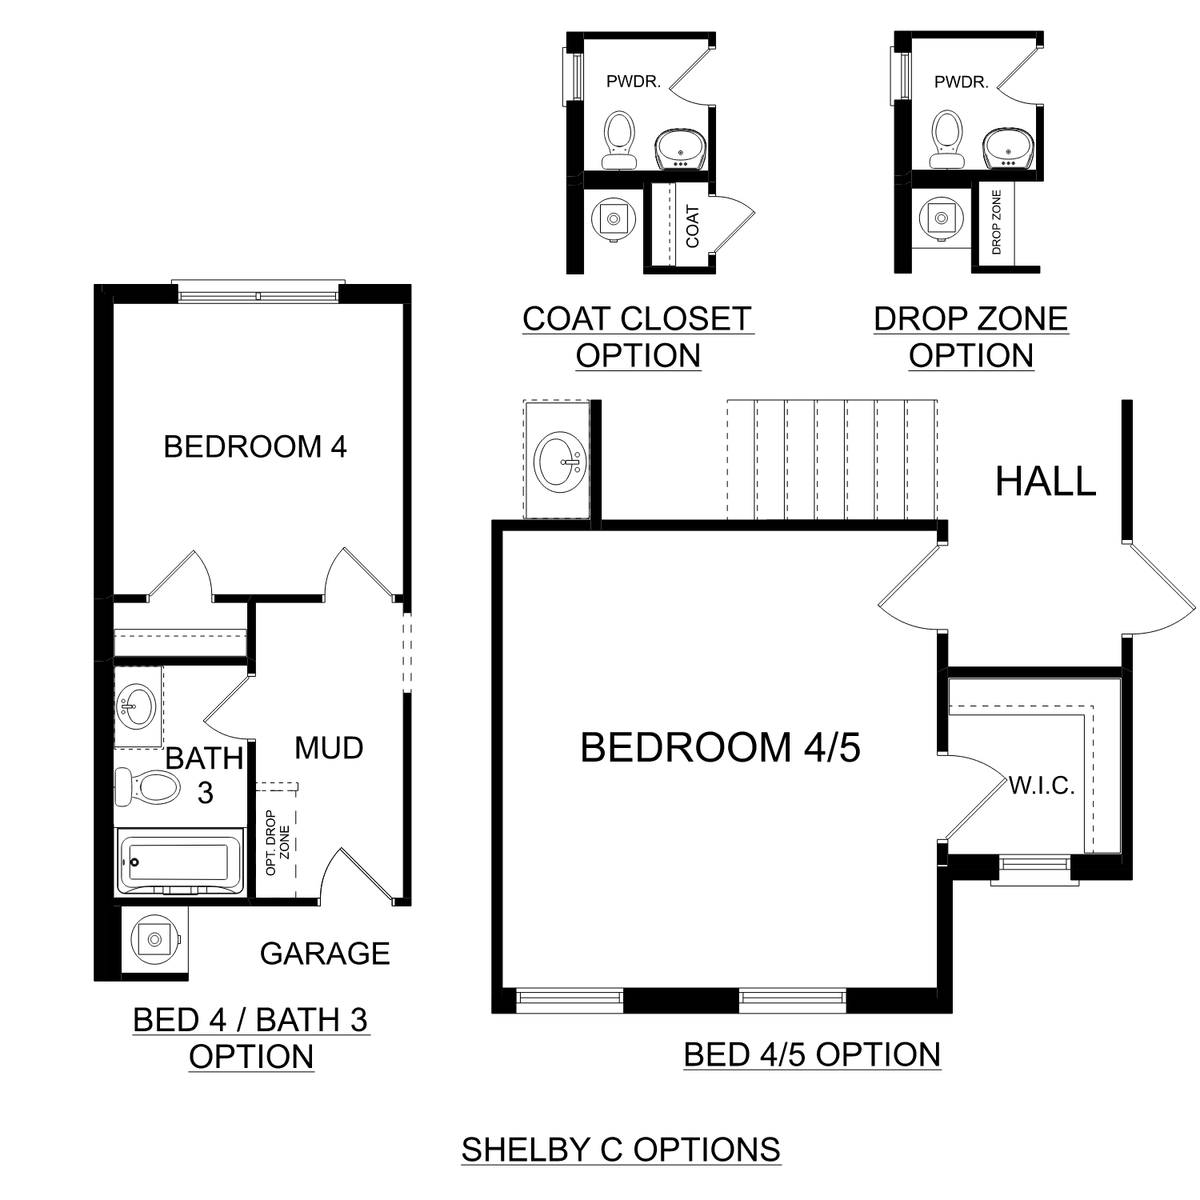 3 - The Shelby C floor plan layout for 125 Hazel Pine Trail in Davidson Homes' Clearview community.